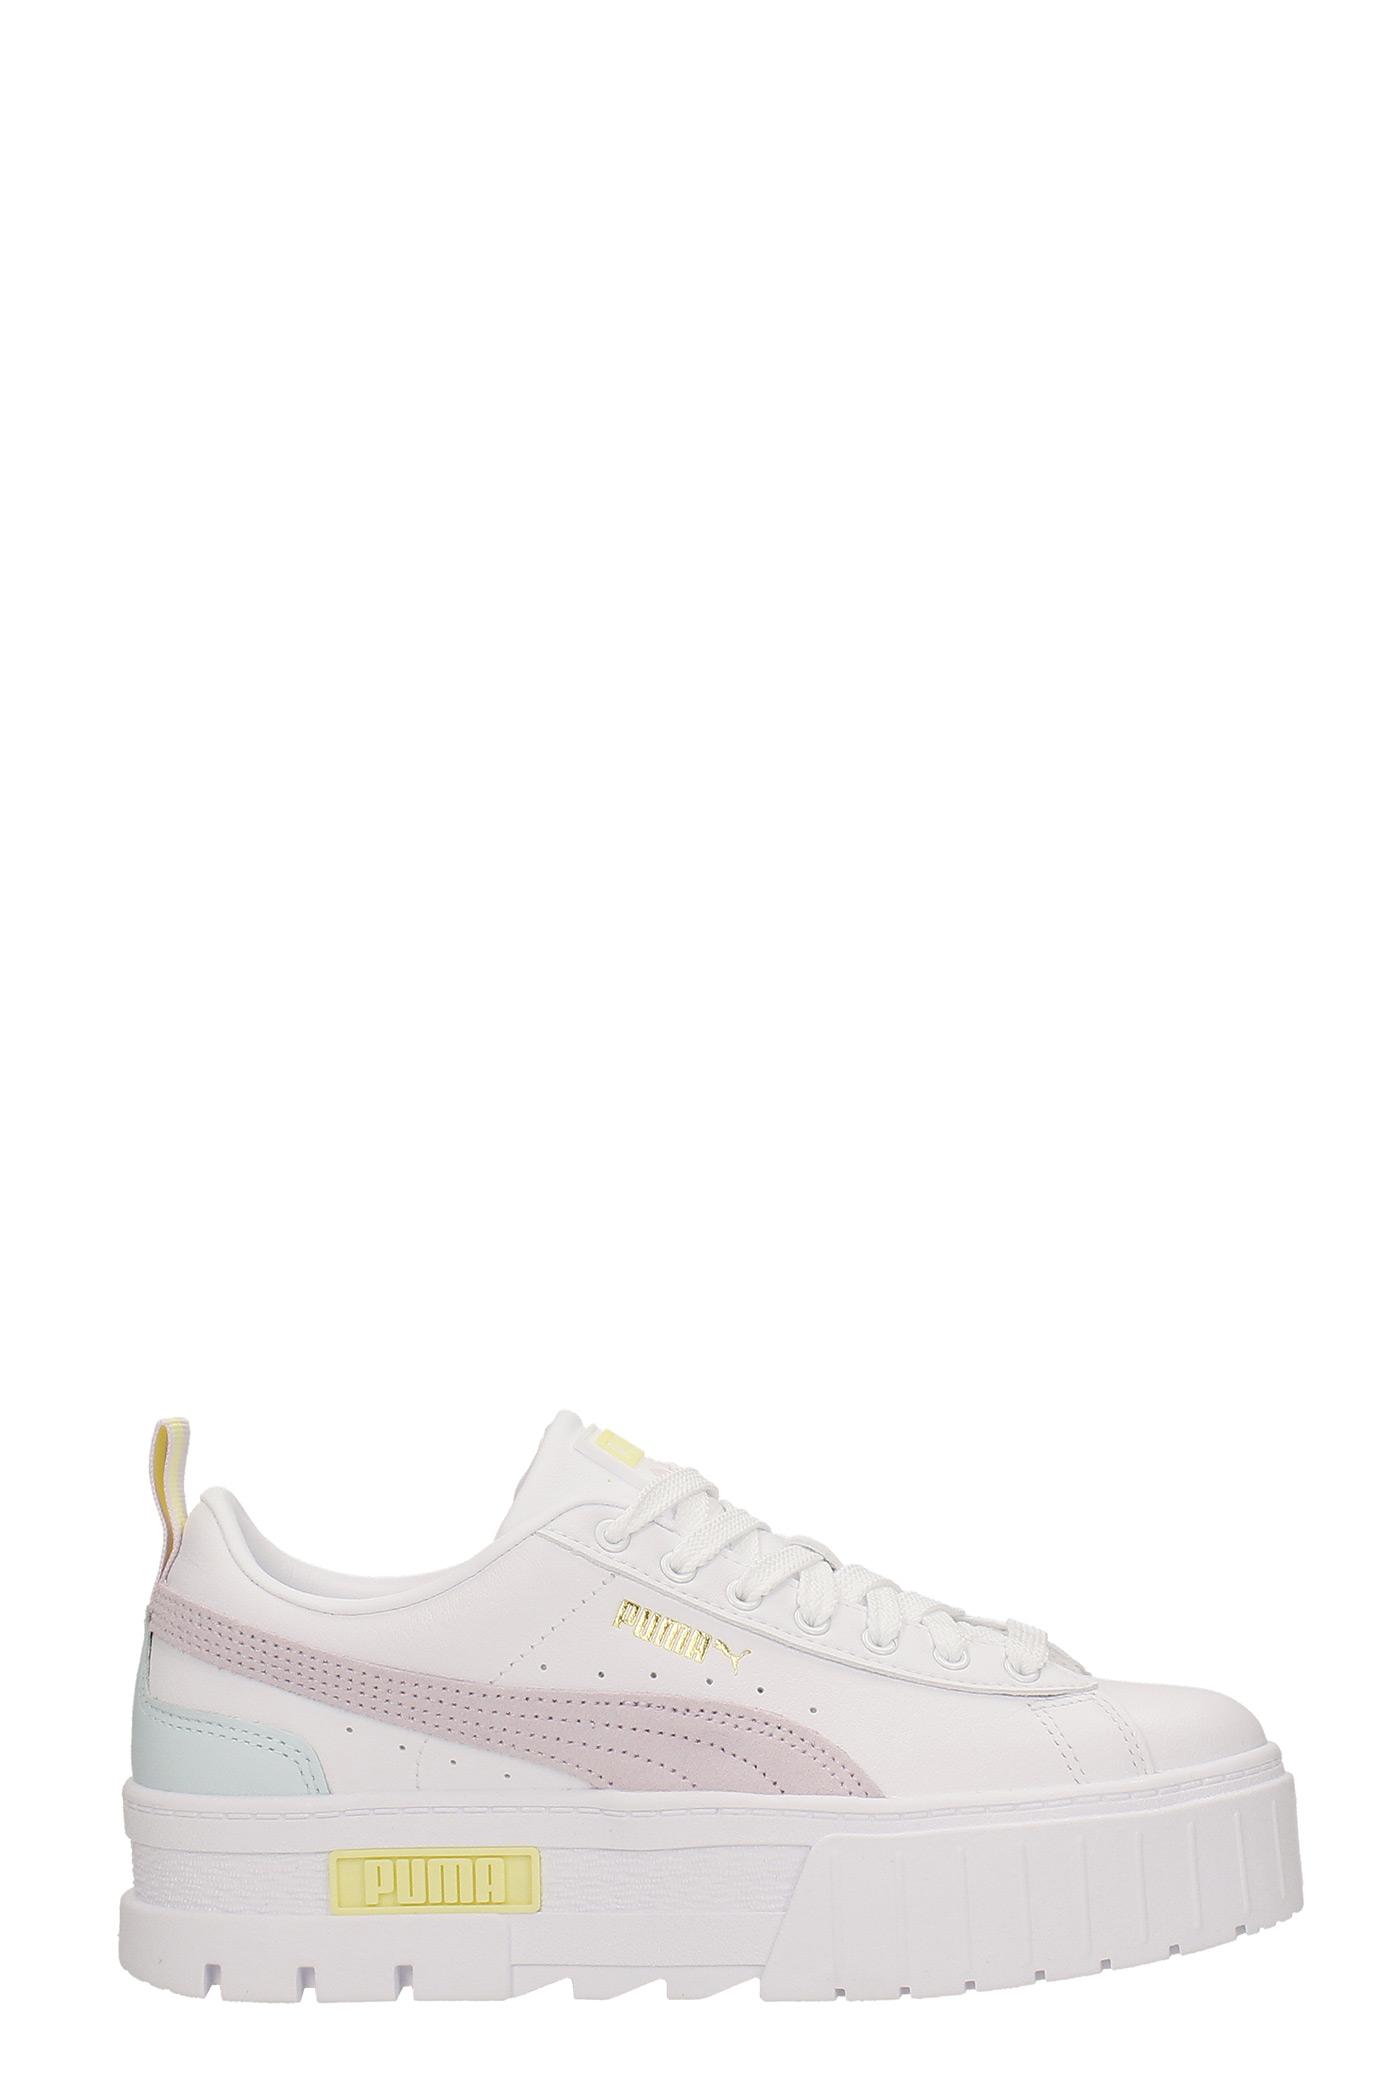 PUMA Mayze Sneakers In White Leather | Lyst